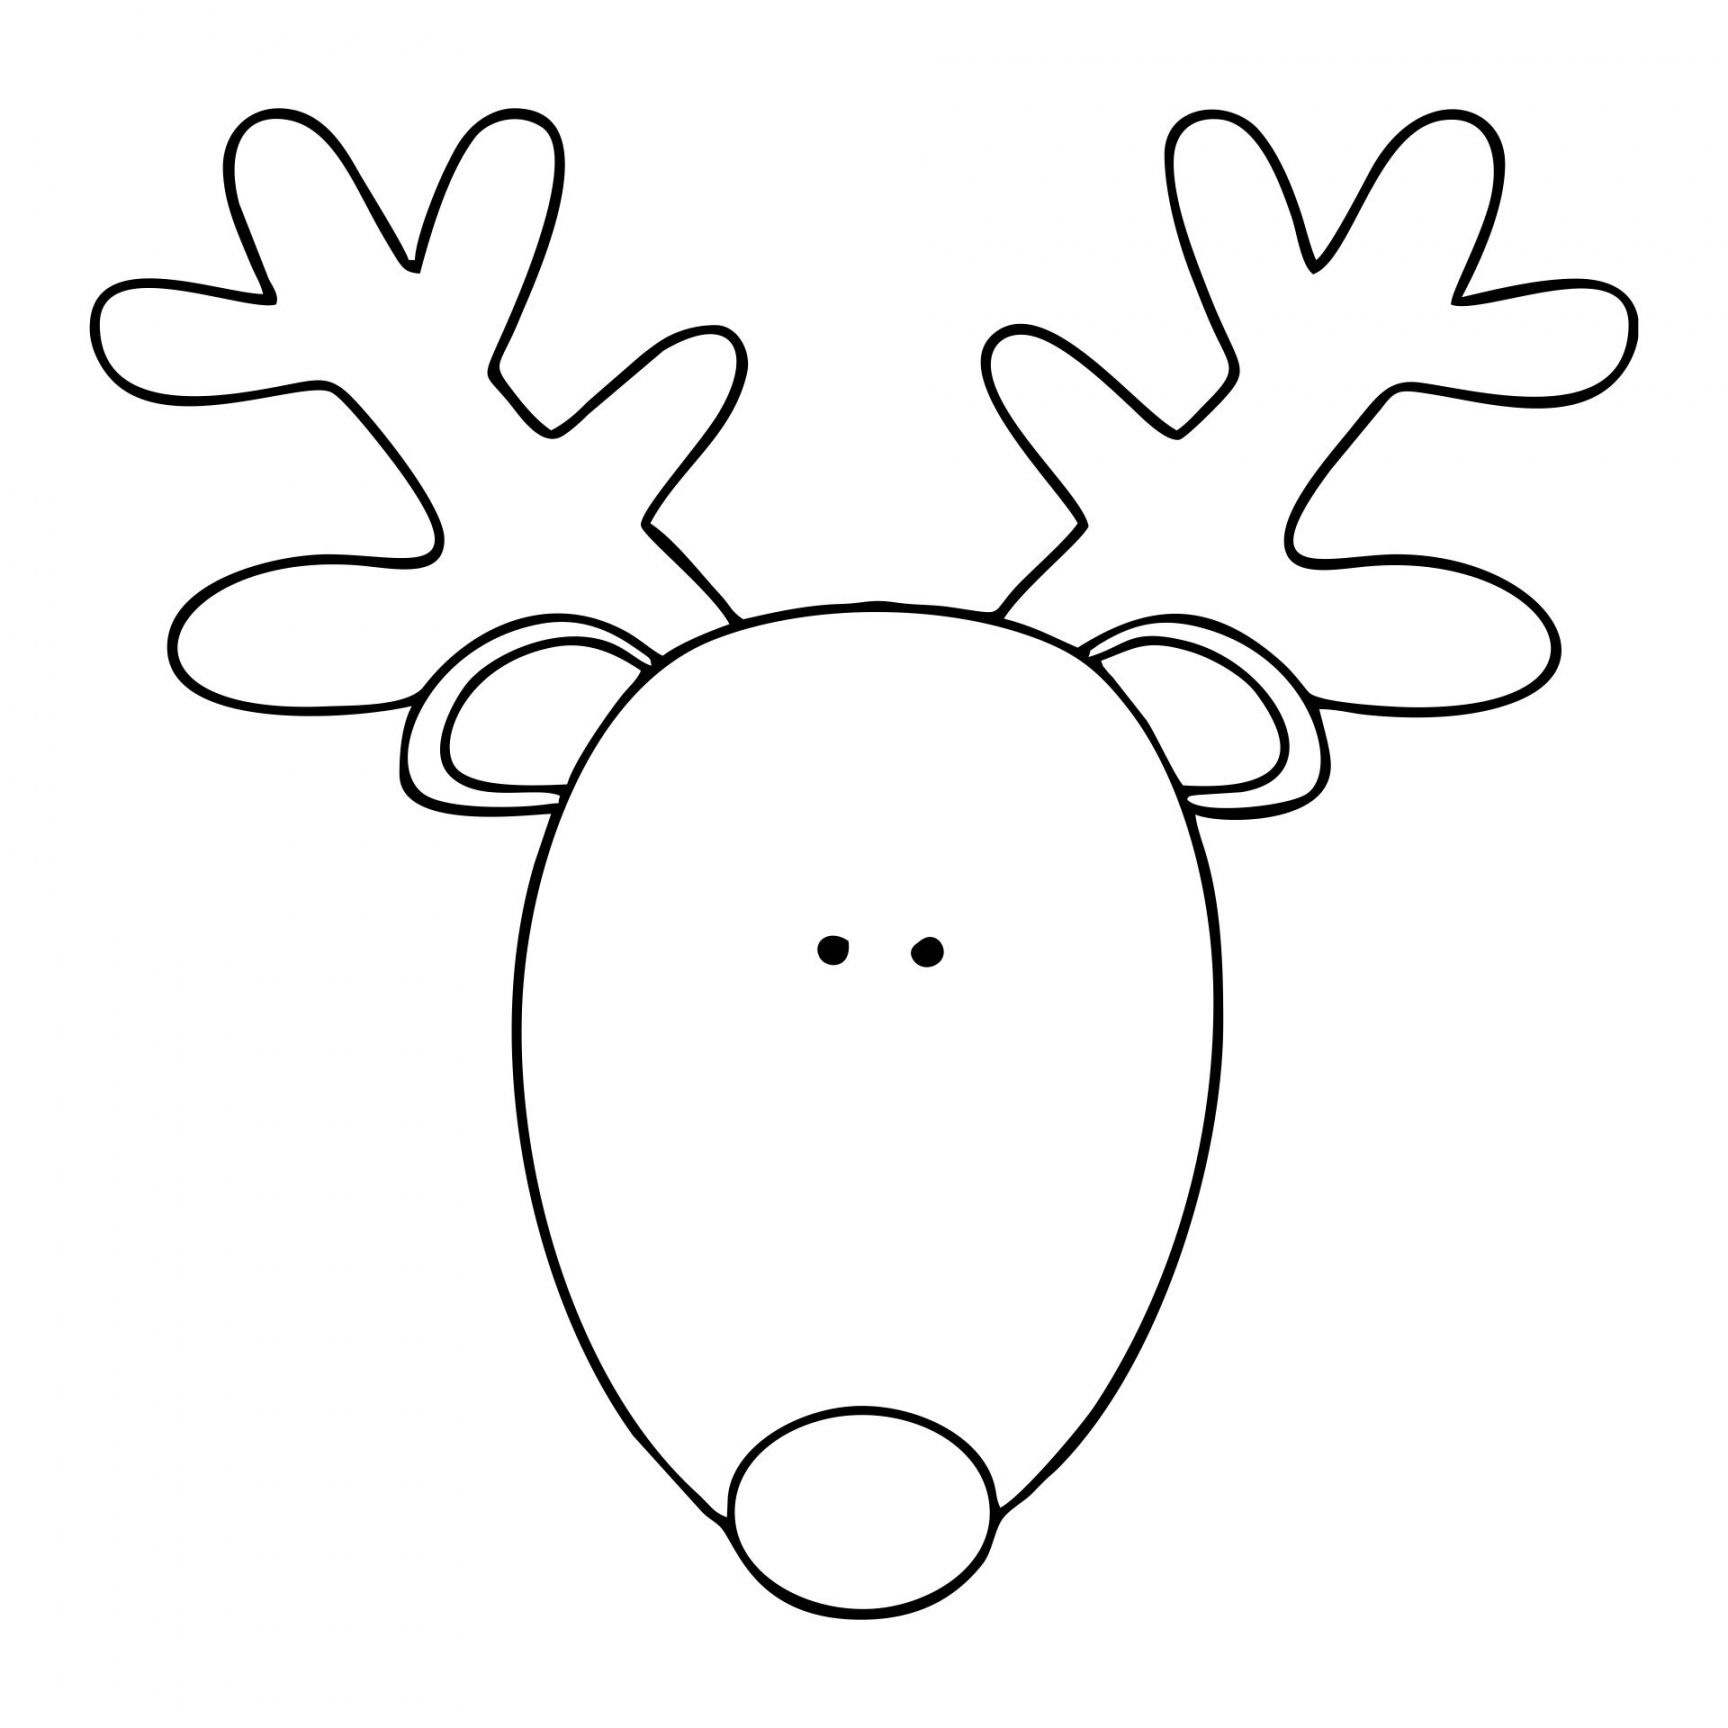 Pin on Contest - FREE Printables - Reindeer Face Template